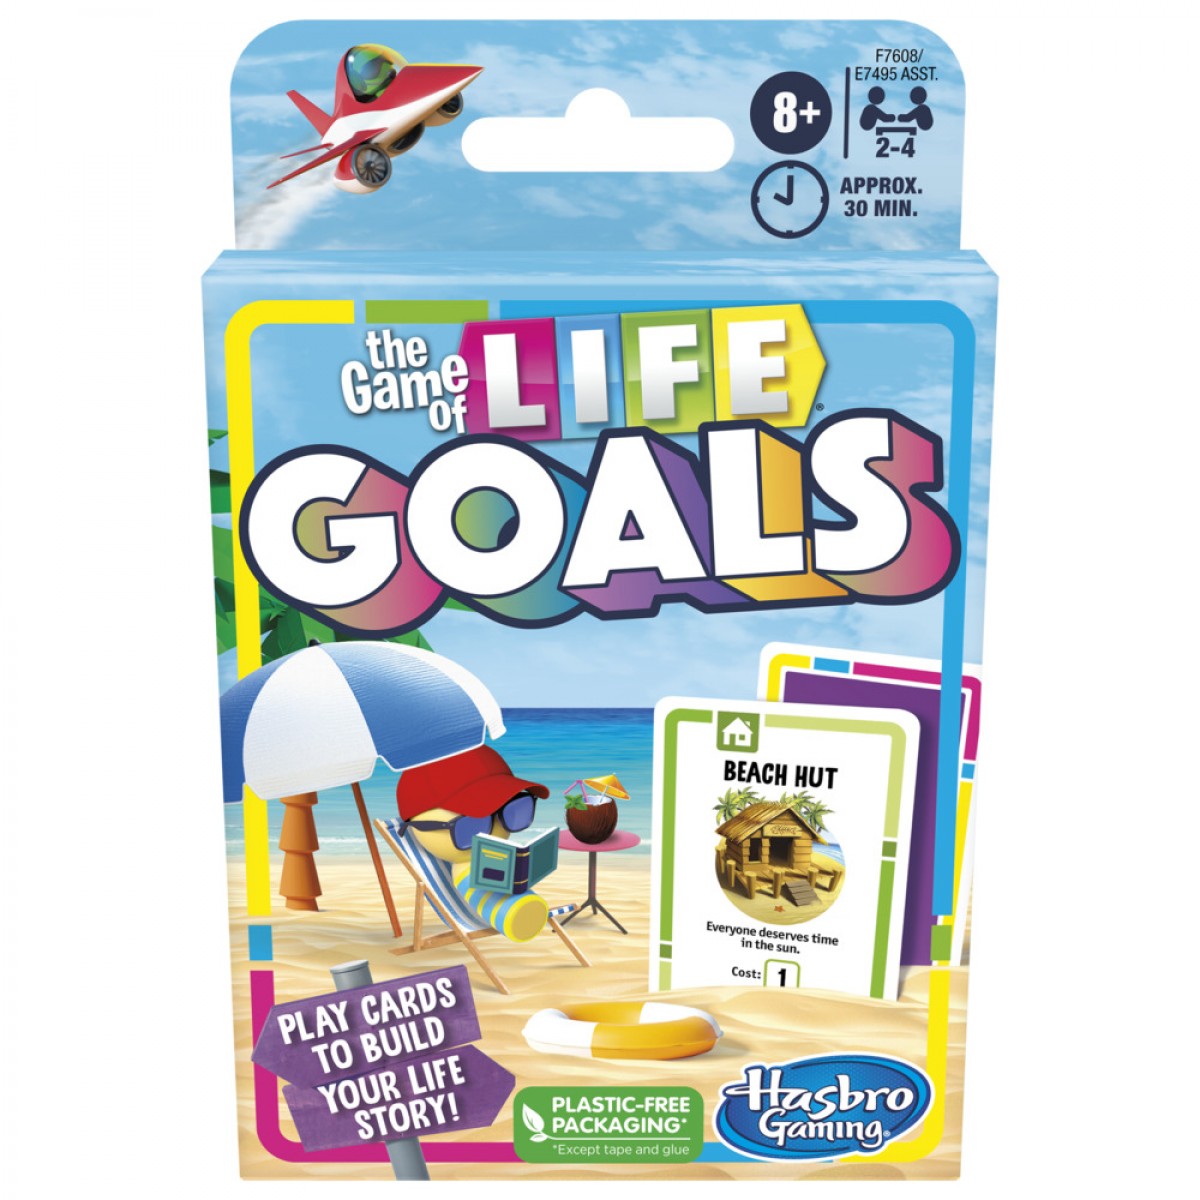 The Game Of Life Goals Game, Quick-Playing Card Game For 2-4 Players, The Game Of Life Card Game For Families And Kids, 8Yrs+, Multicolour